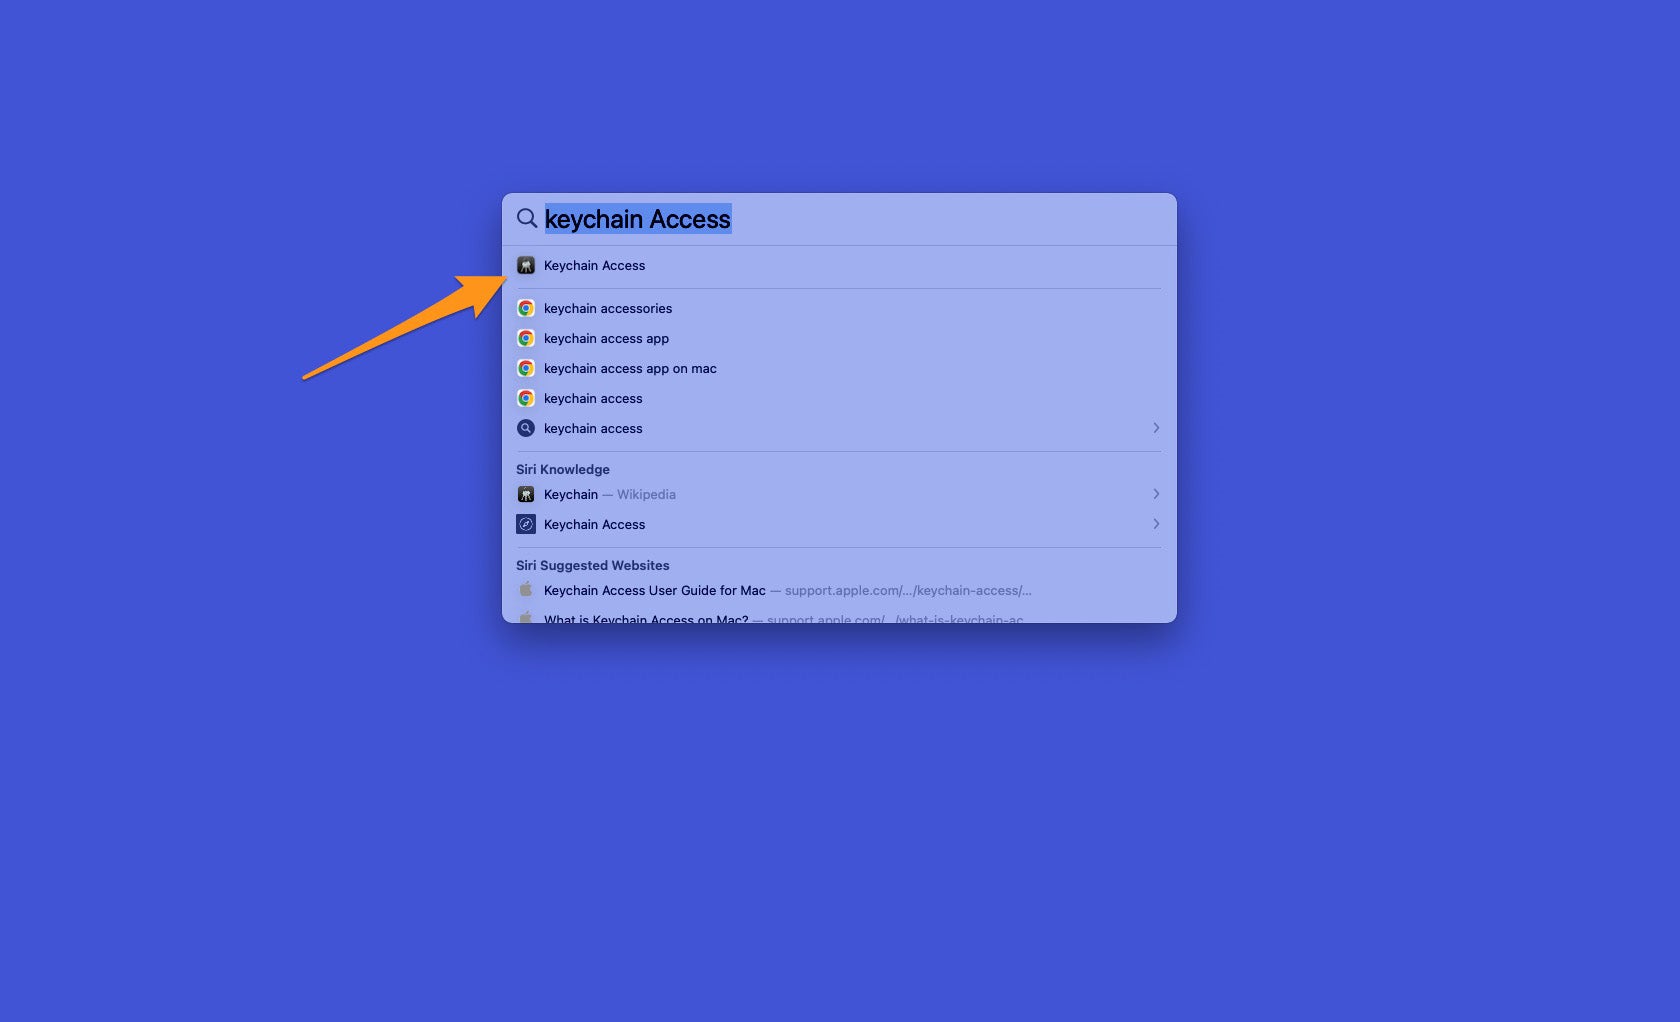 The Mac search function with "Keychain Access" typed into it, showing where to find the Keychain Access app.